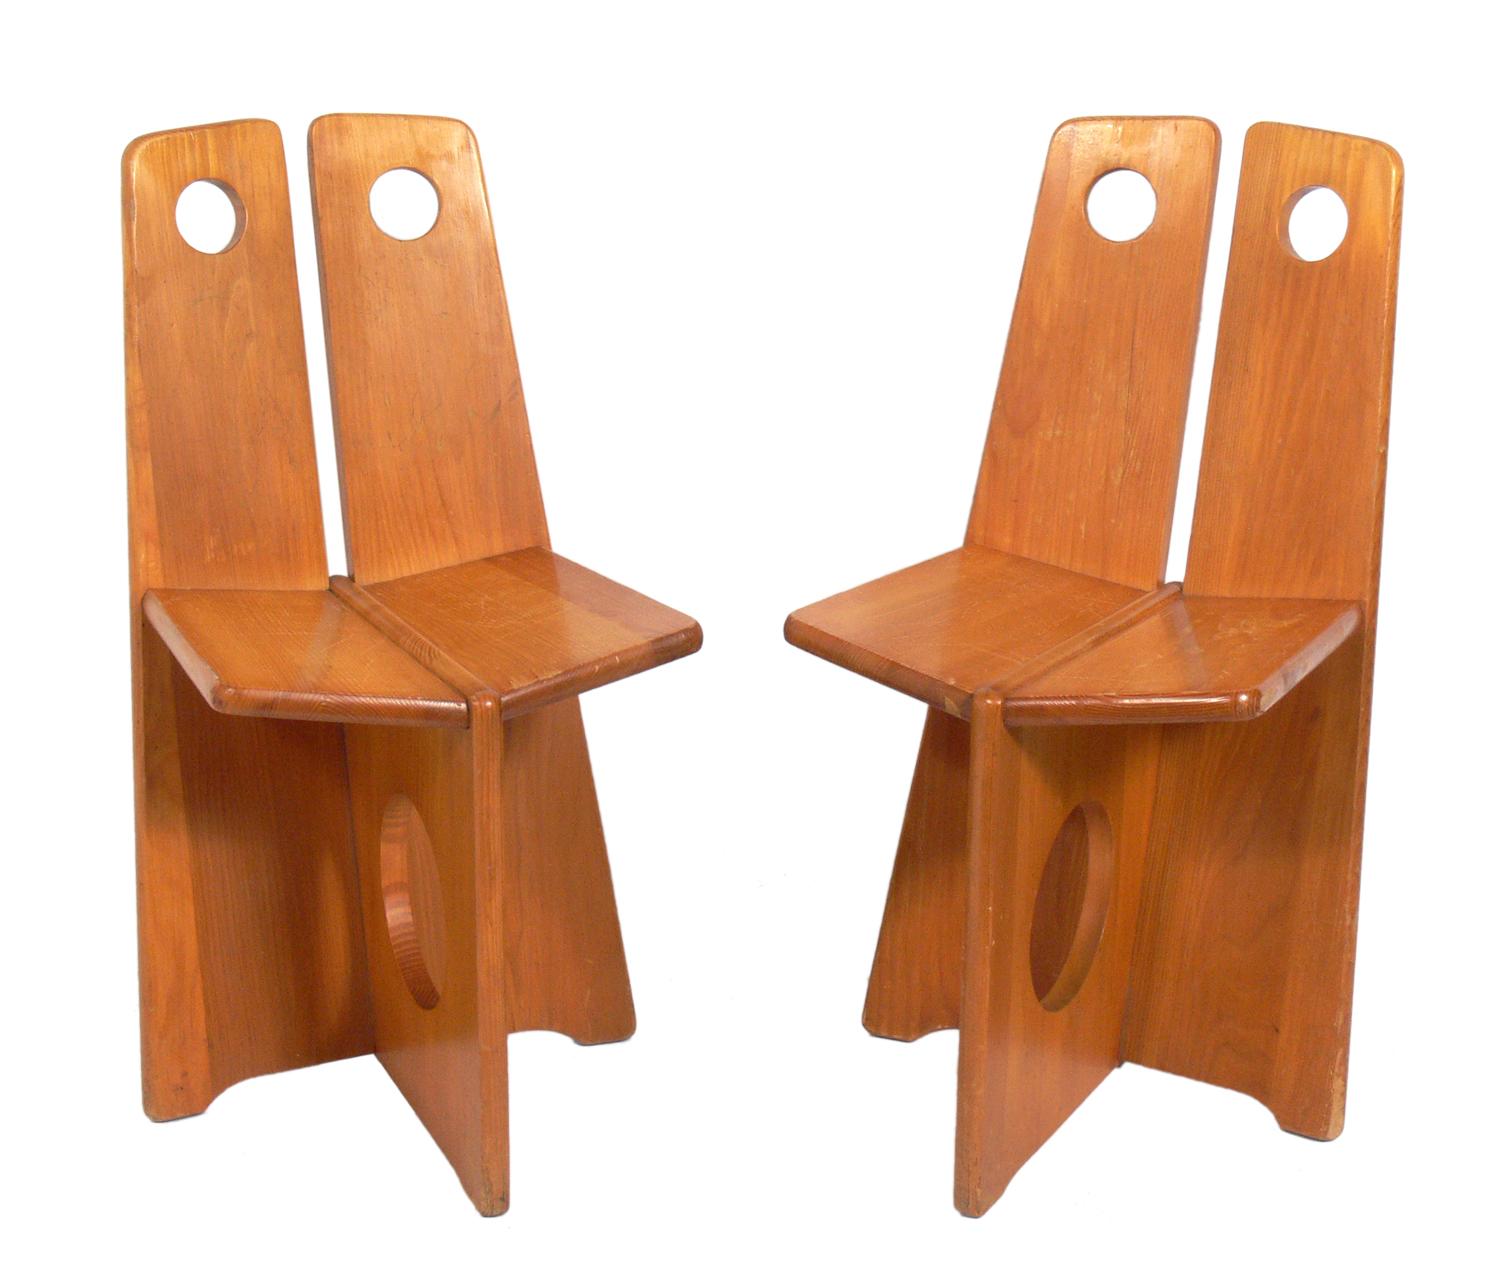 Pair of low slung constructivist chairs, German, circa 1950s. Design clearly influenced by Russian constructivism. Well worn, industrial vibe with warm original patina. They are a low slung lounge size, and appear to be kid sized, but are actually